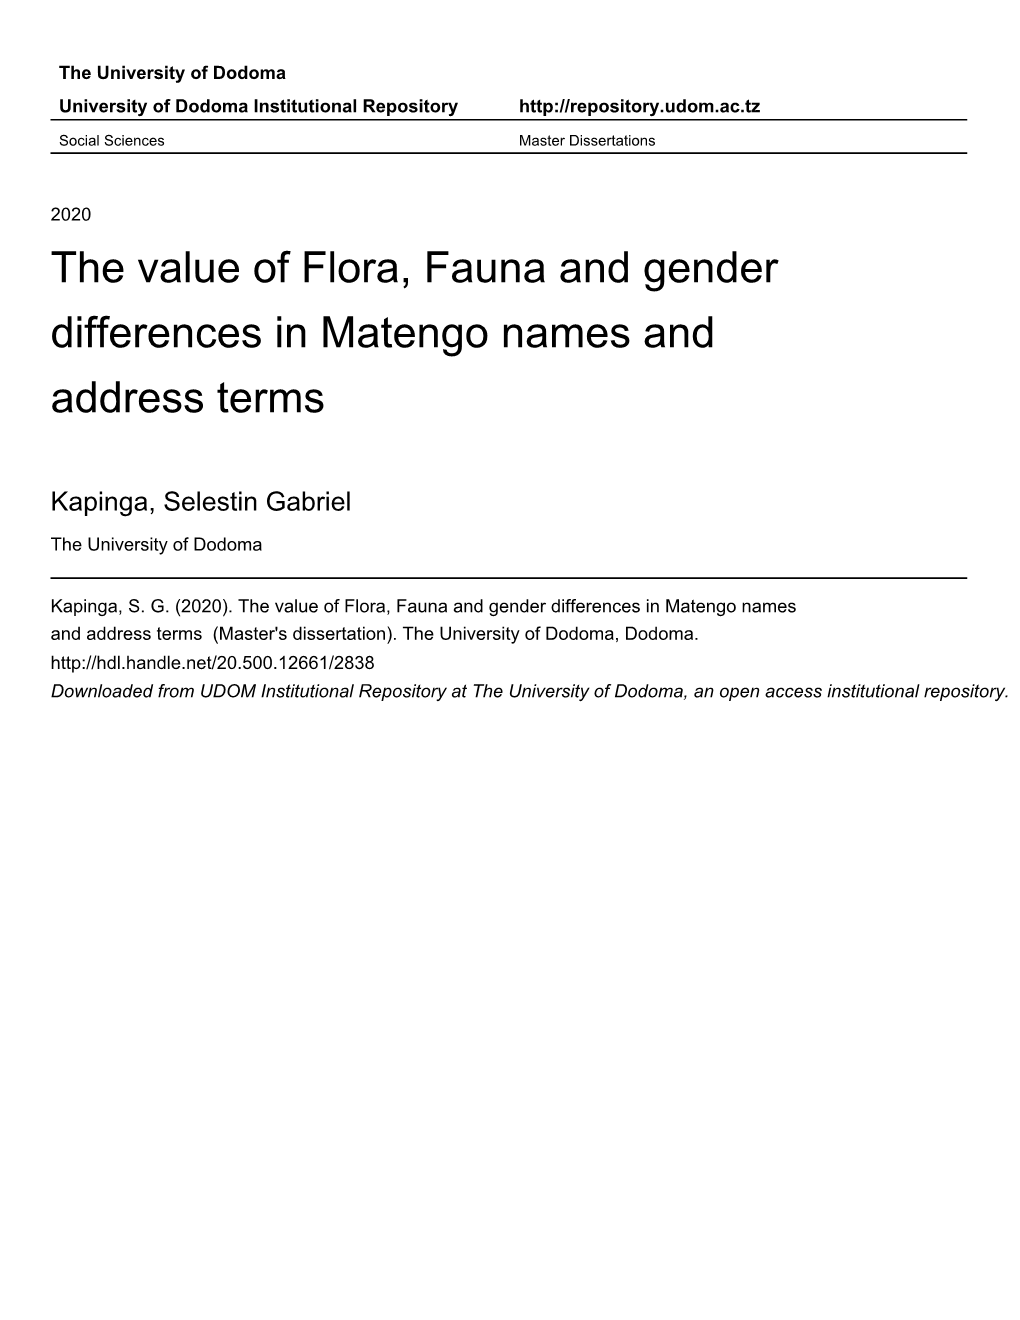 The Value of Flora, Fauna and Gender Differences in Matengo Names and Address Terms